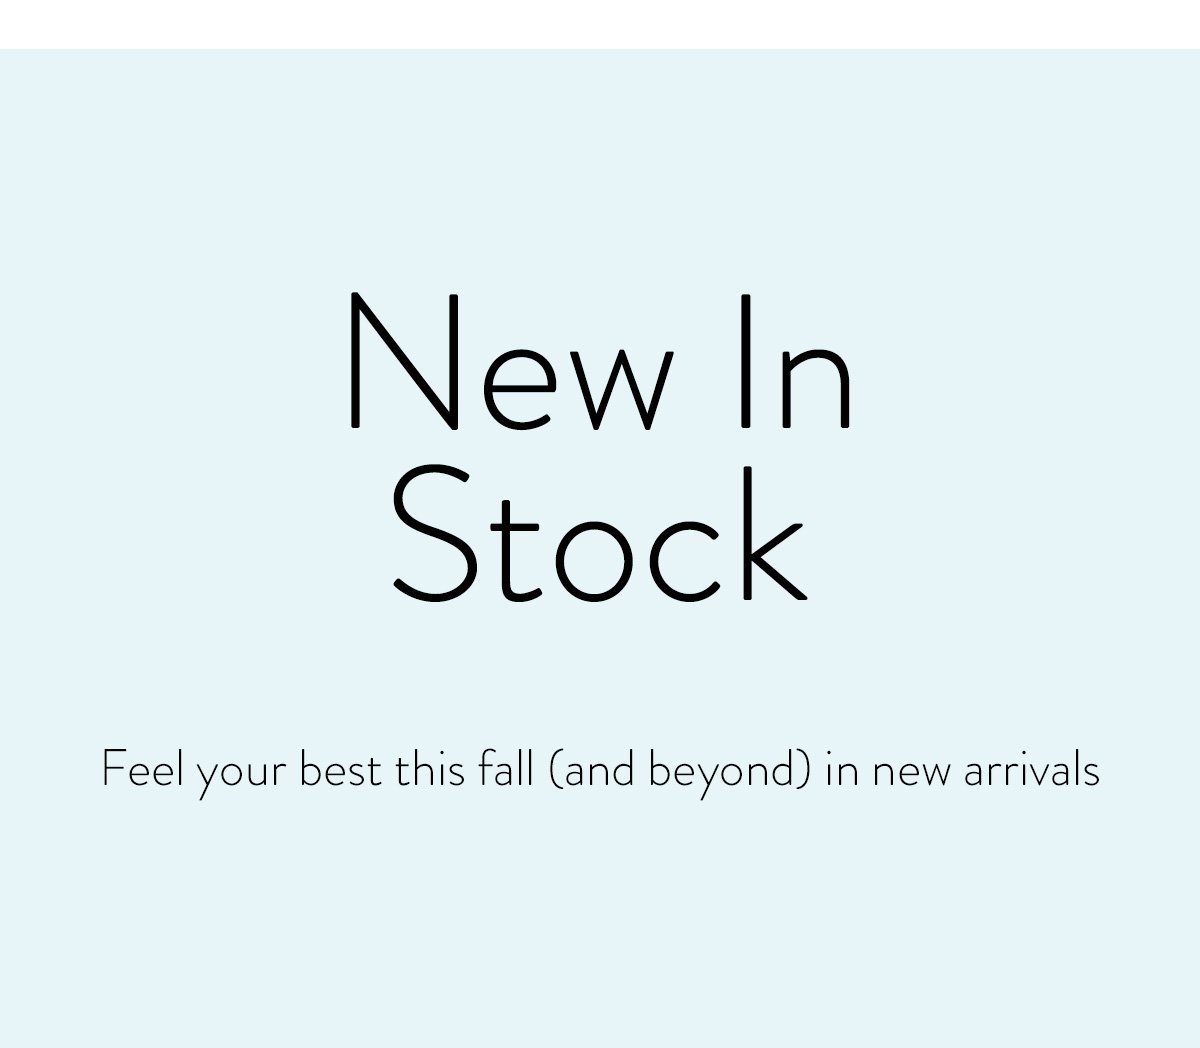 New In Stock / Feel your best this fall (and beyond) in new arrivals